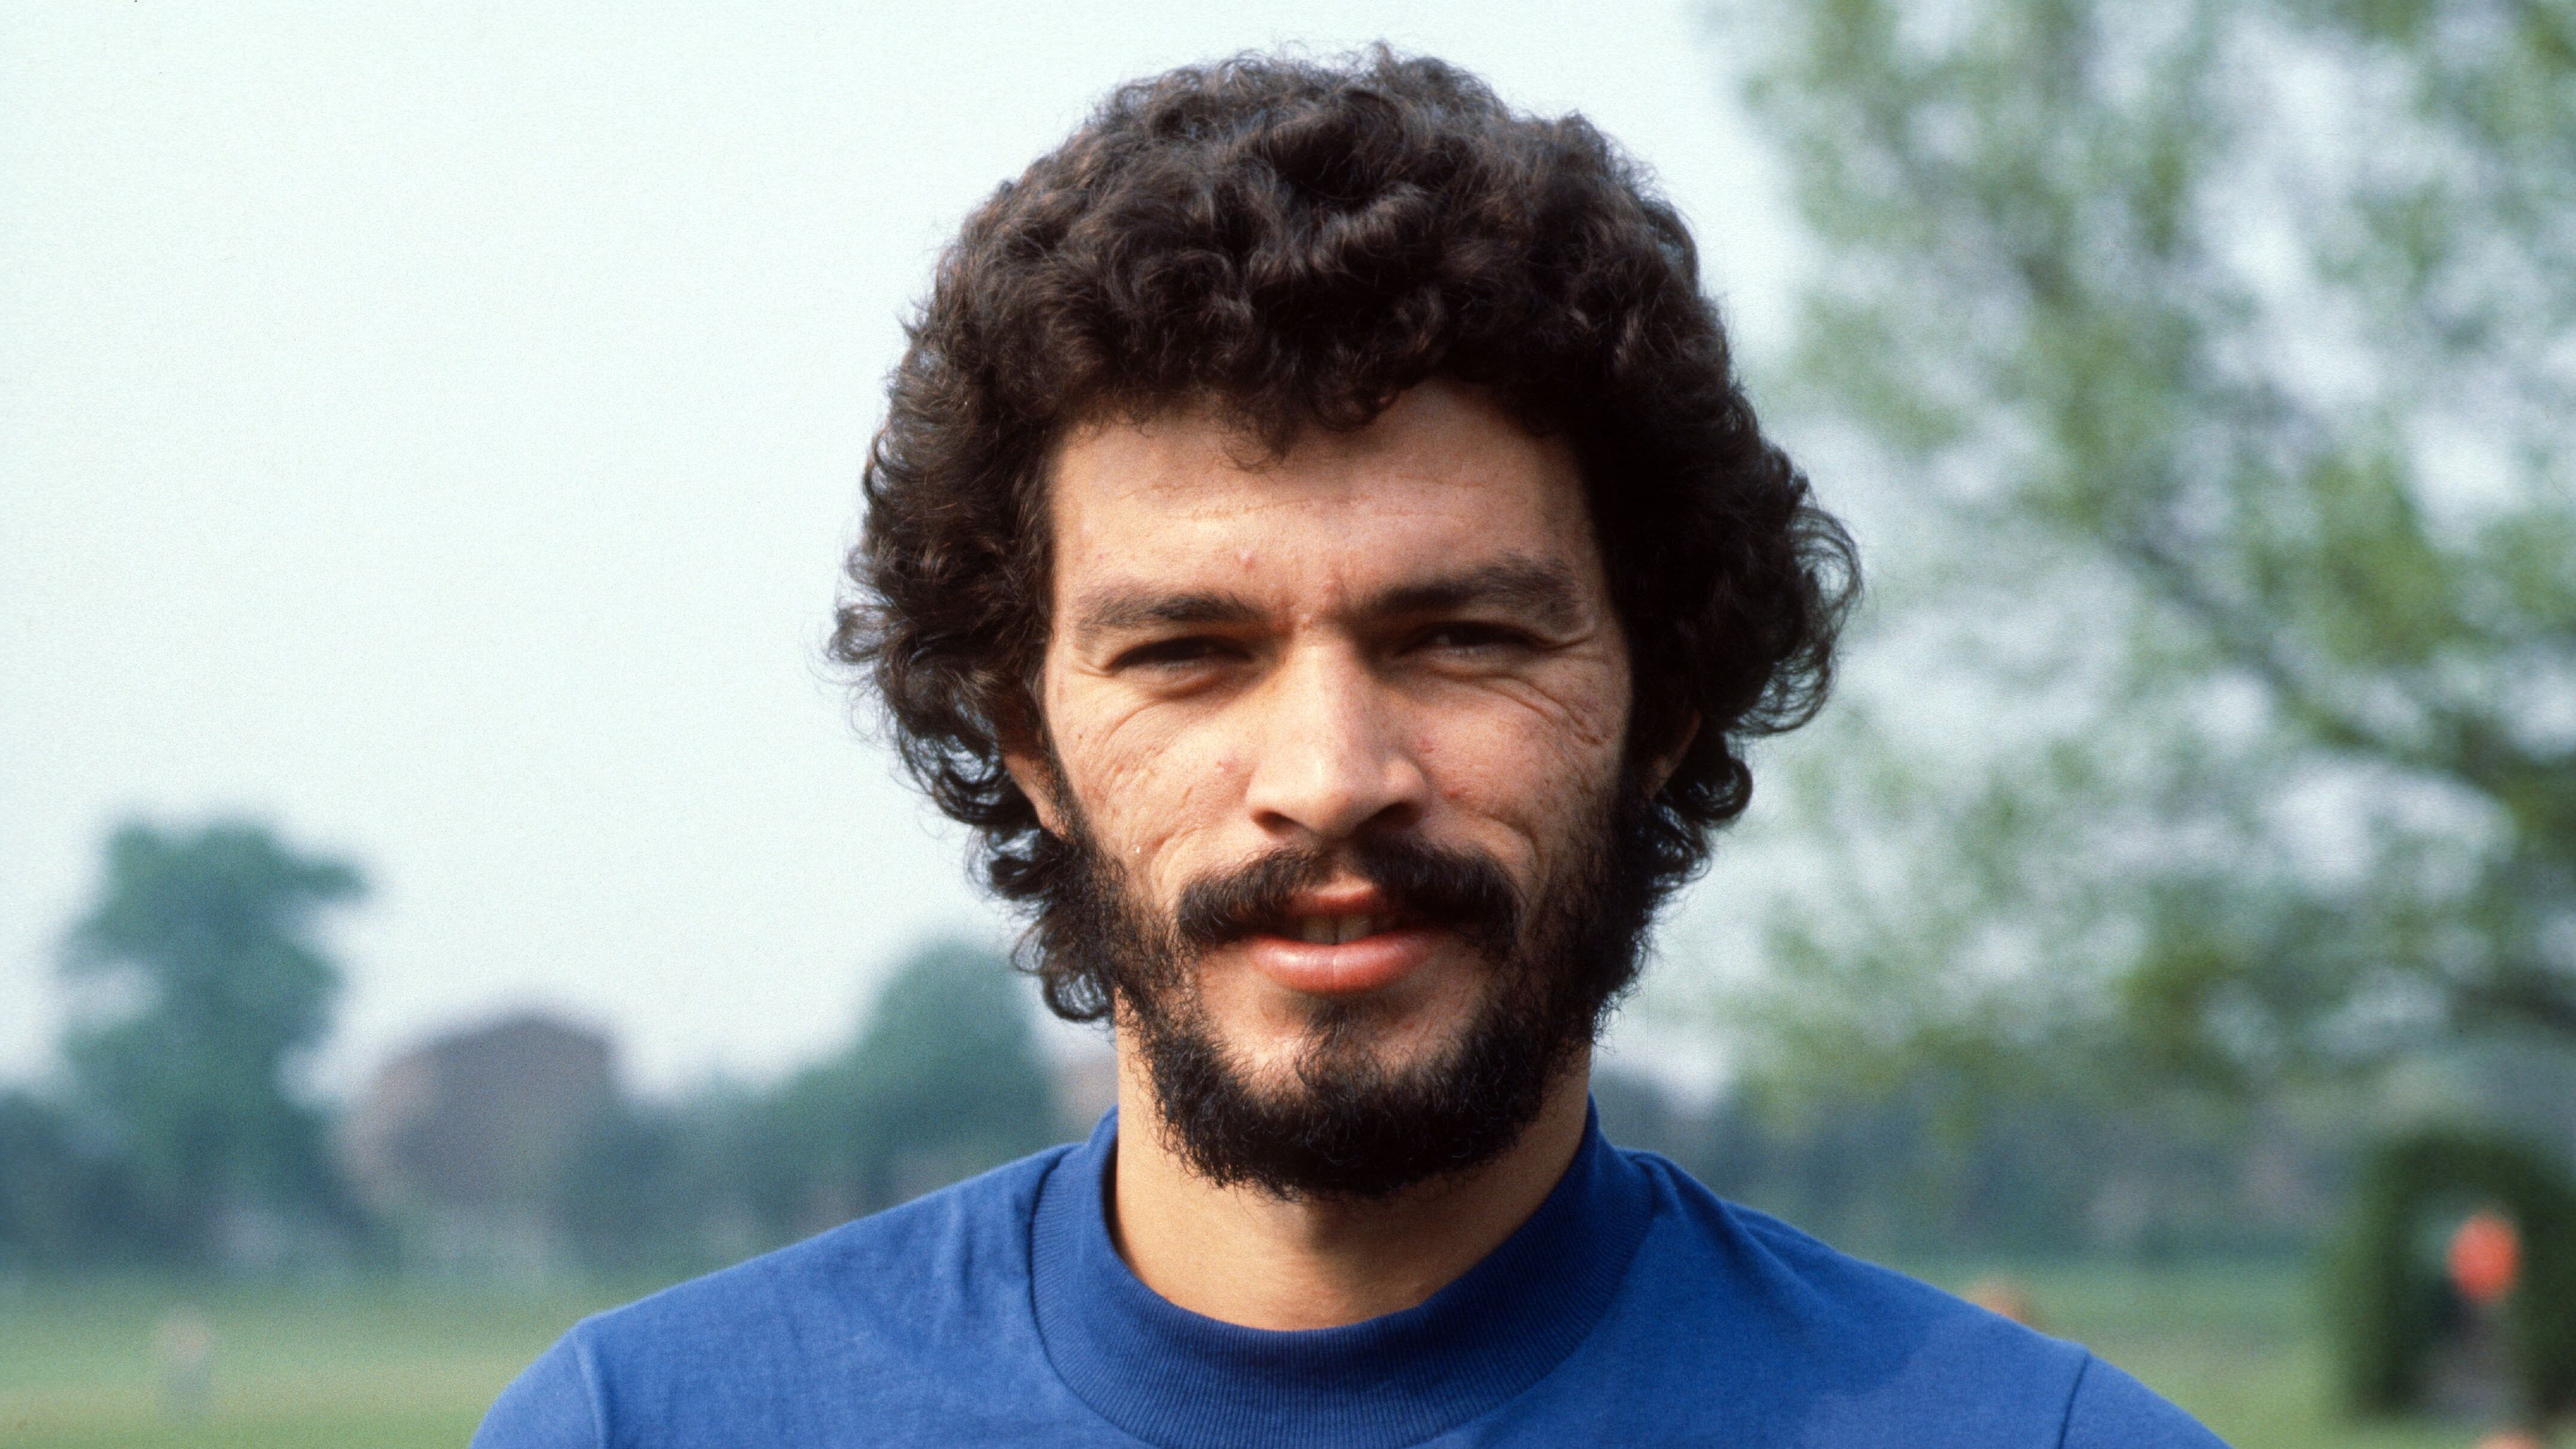 Sócrates in May 1981.